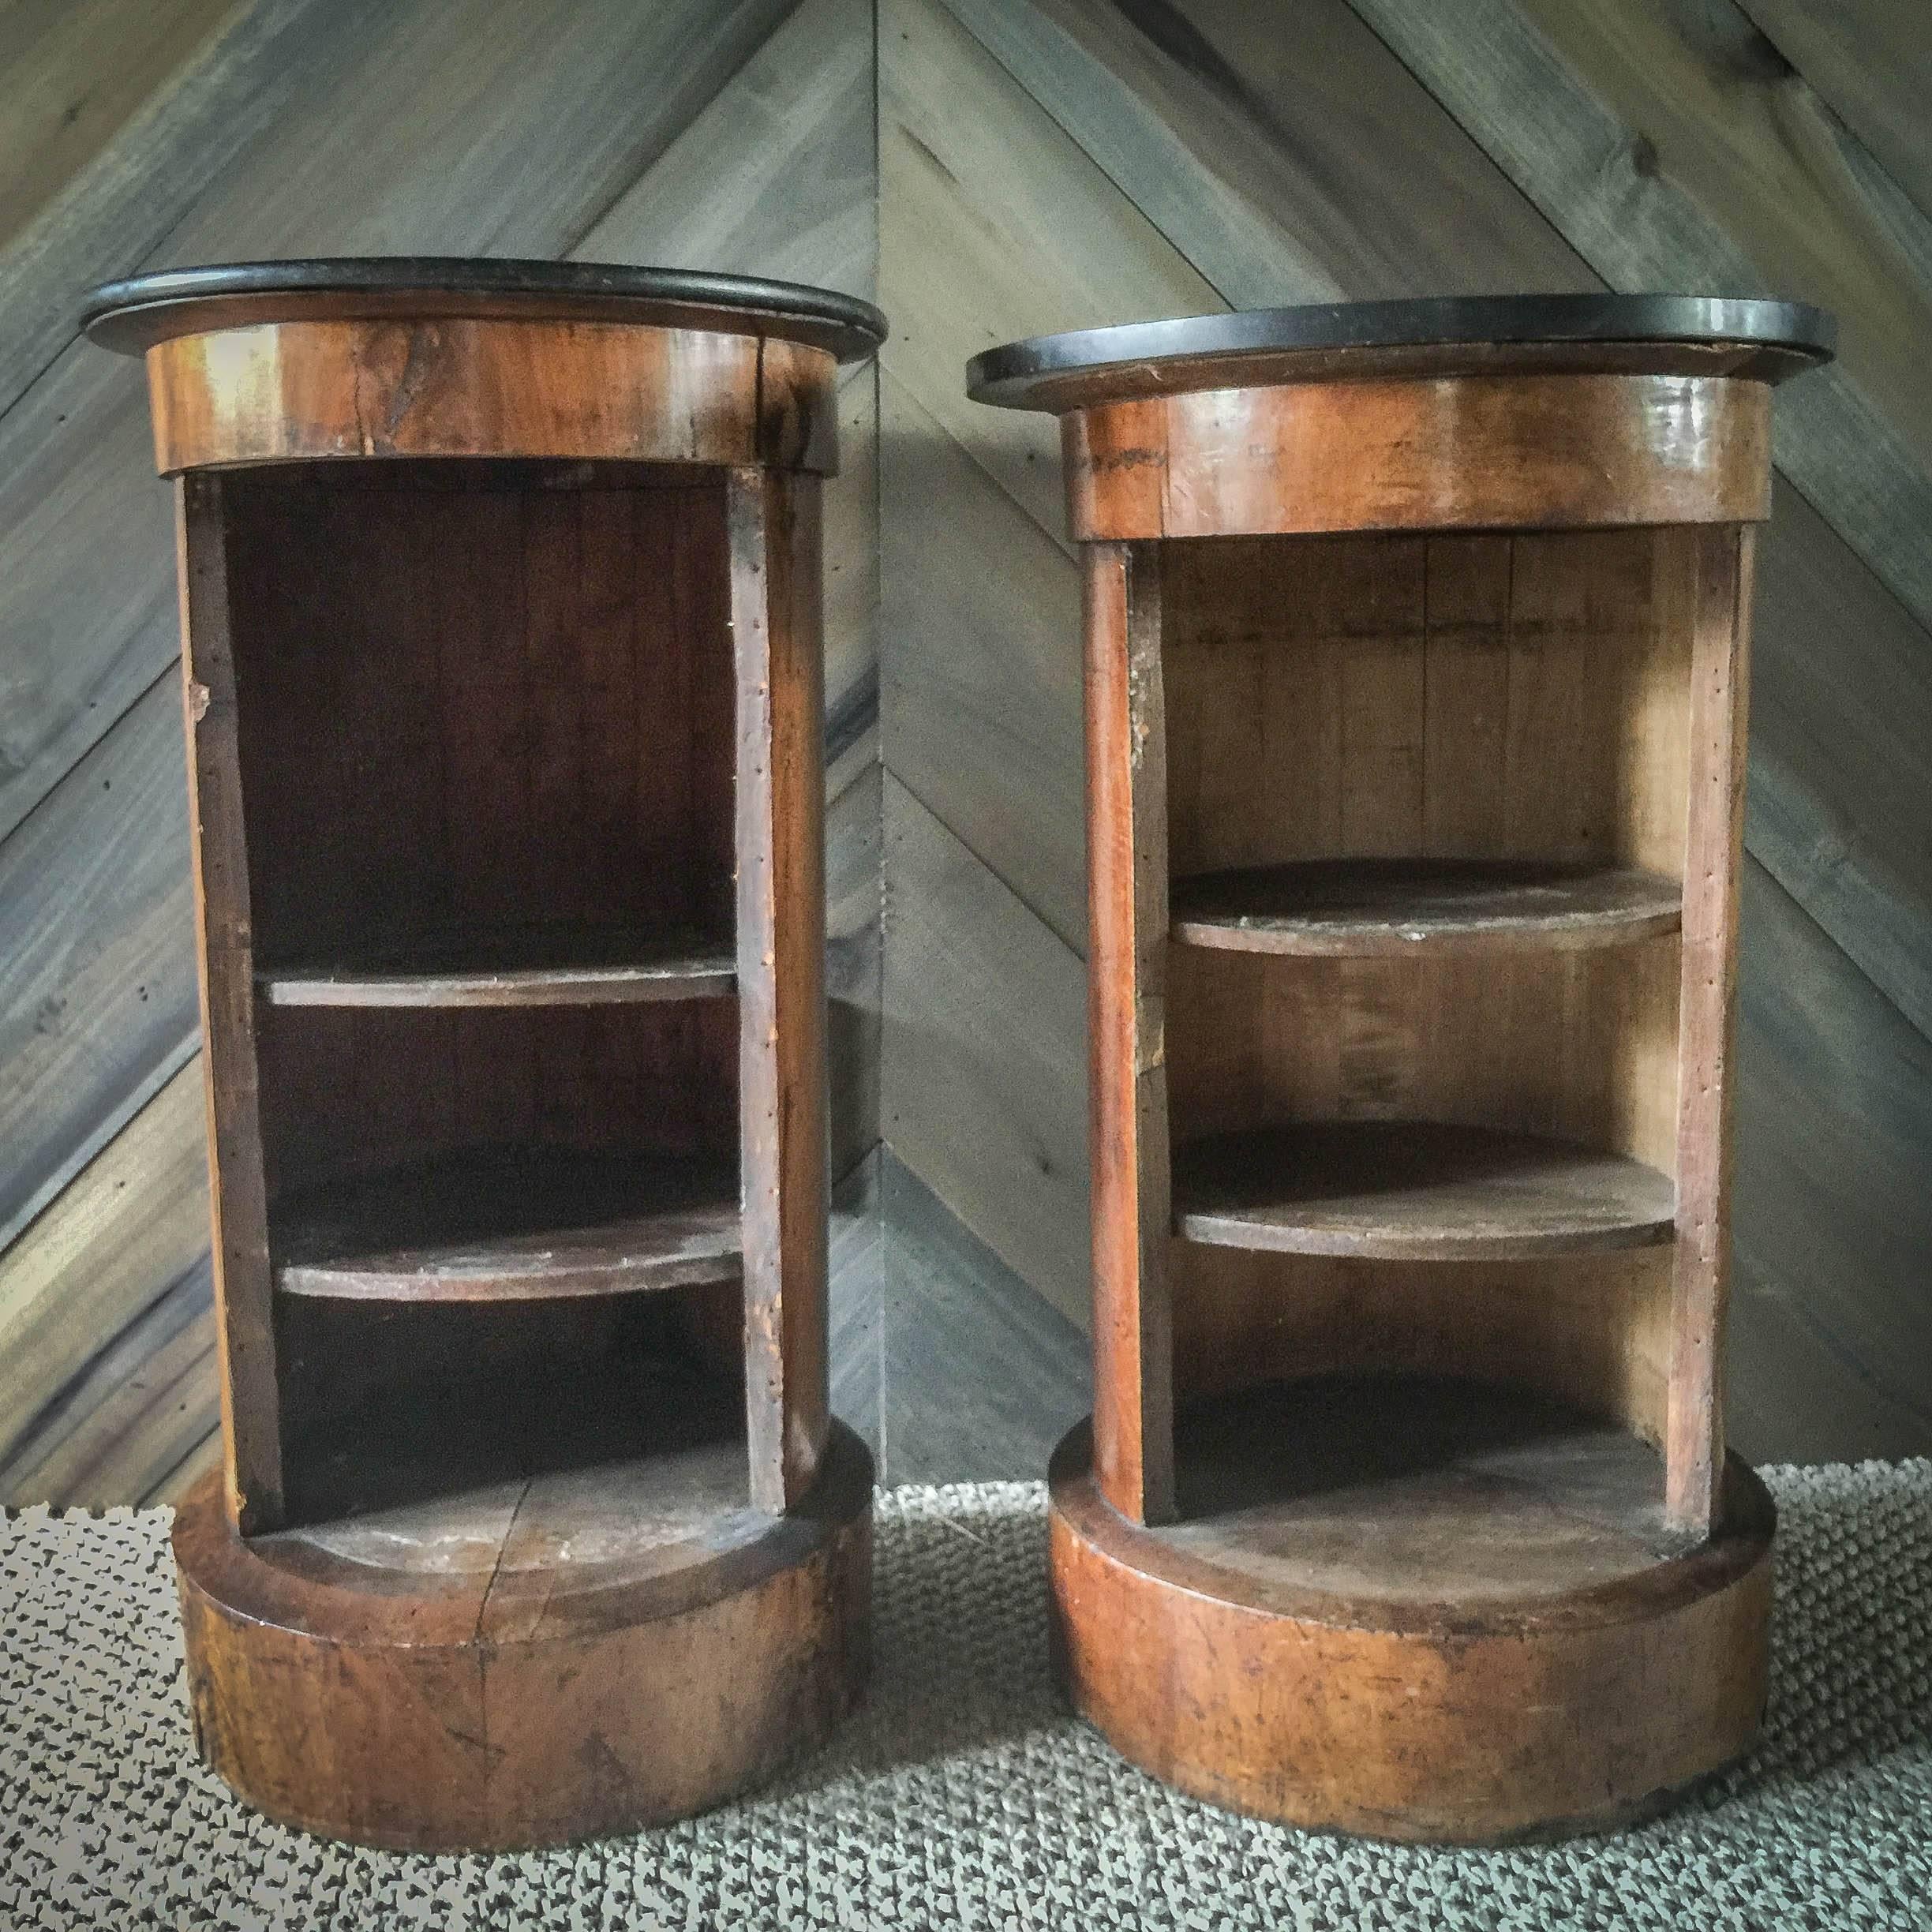 These cabinets are not an exact pair but work well together and were bought from the same estate and presumably used together. One is one inch shorter with a slightly thicker detached black marble top. Both have two shelves in the back without the